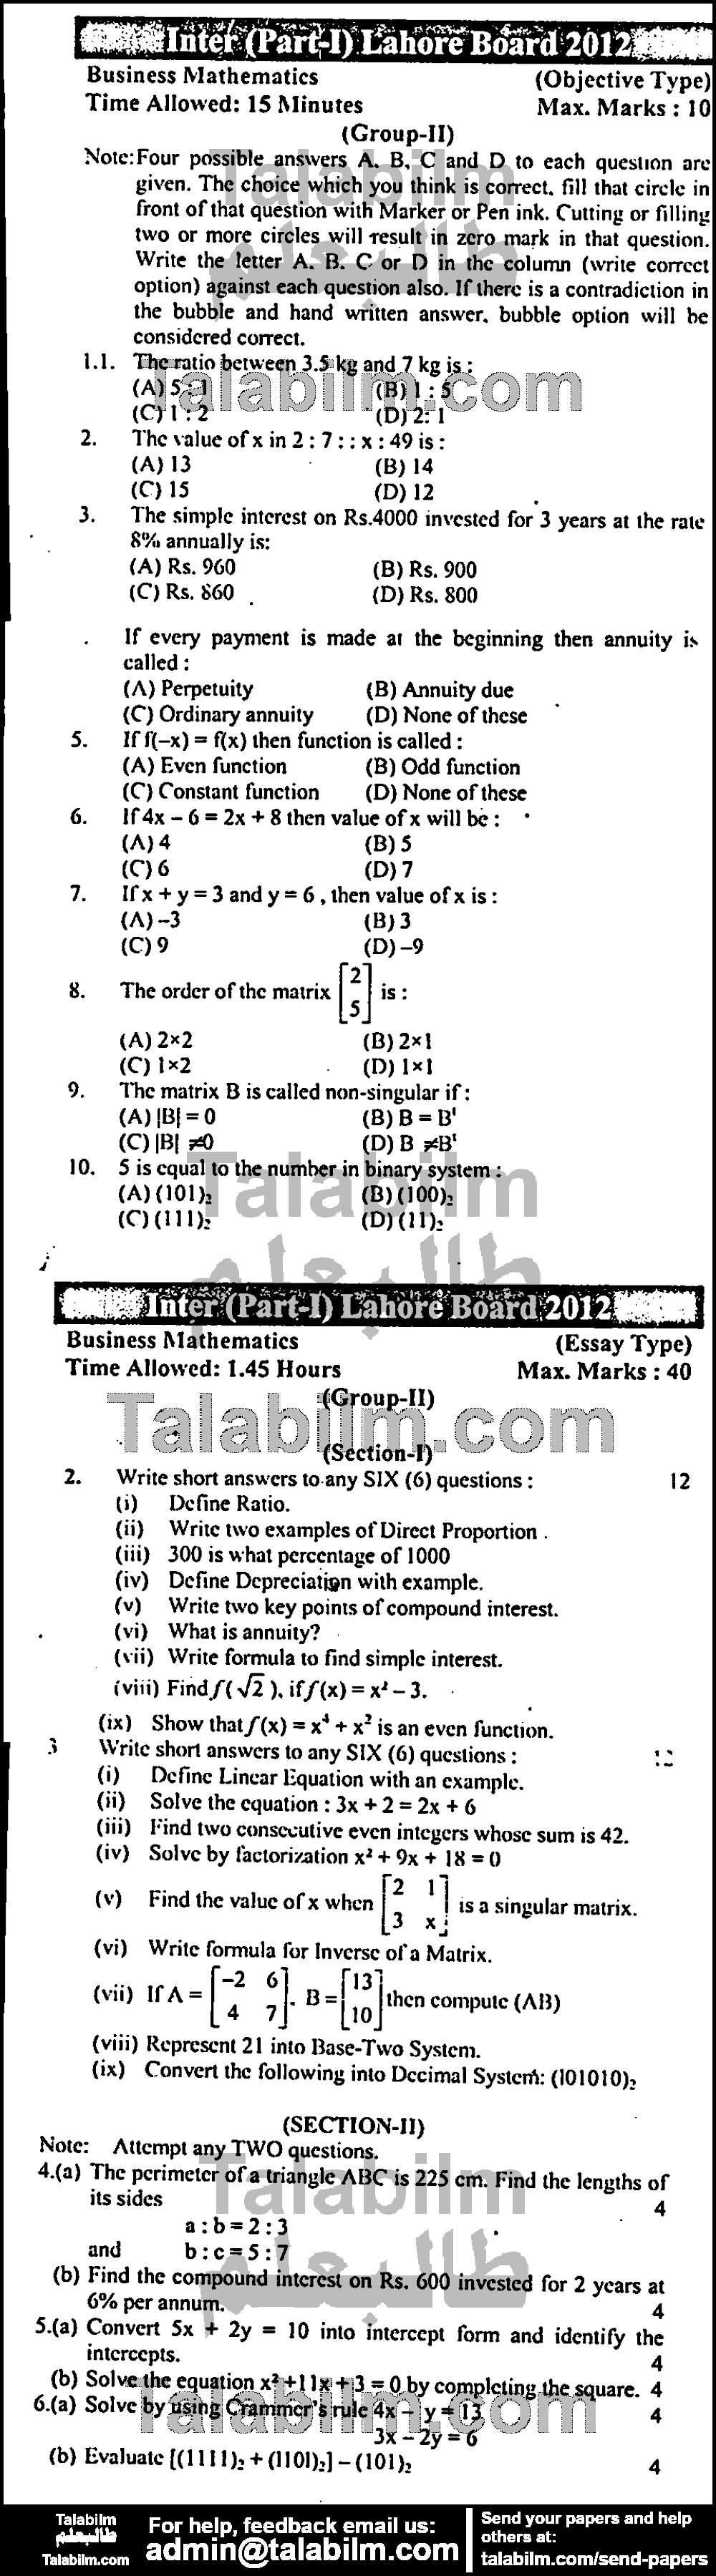 Business Mathematics 0 past paper for Group-II 2012